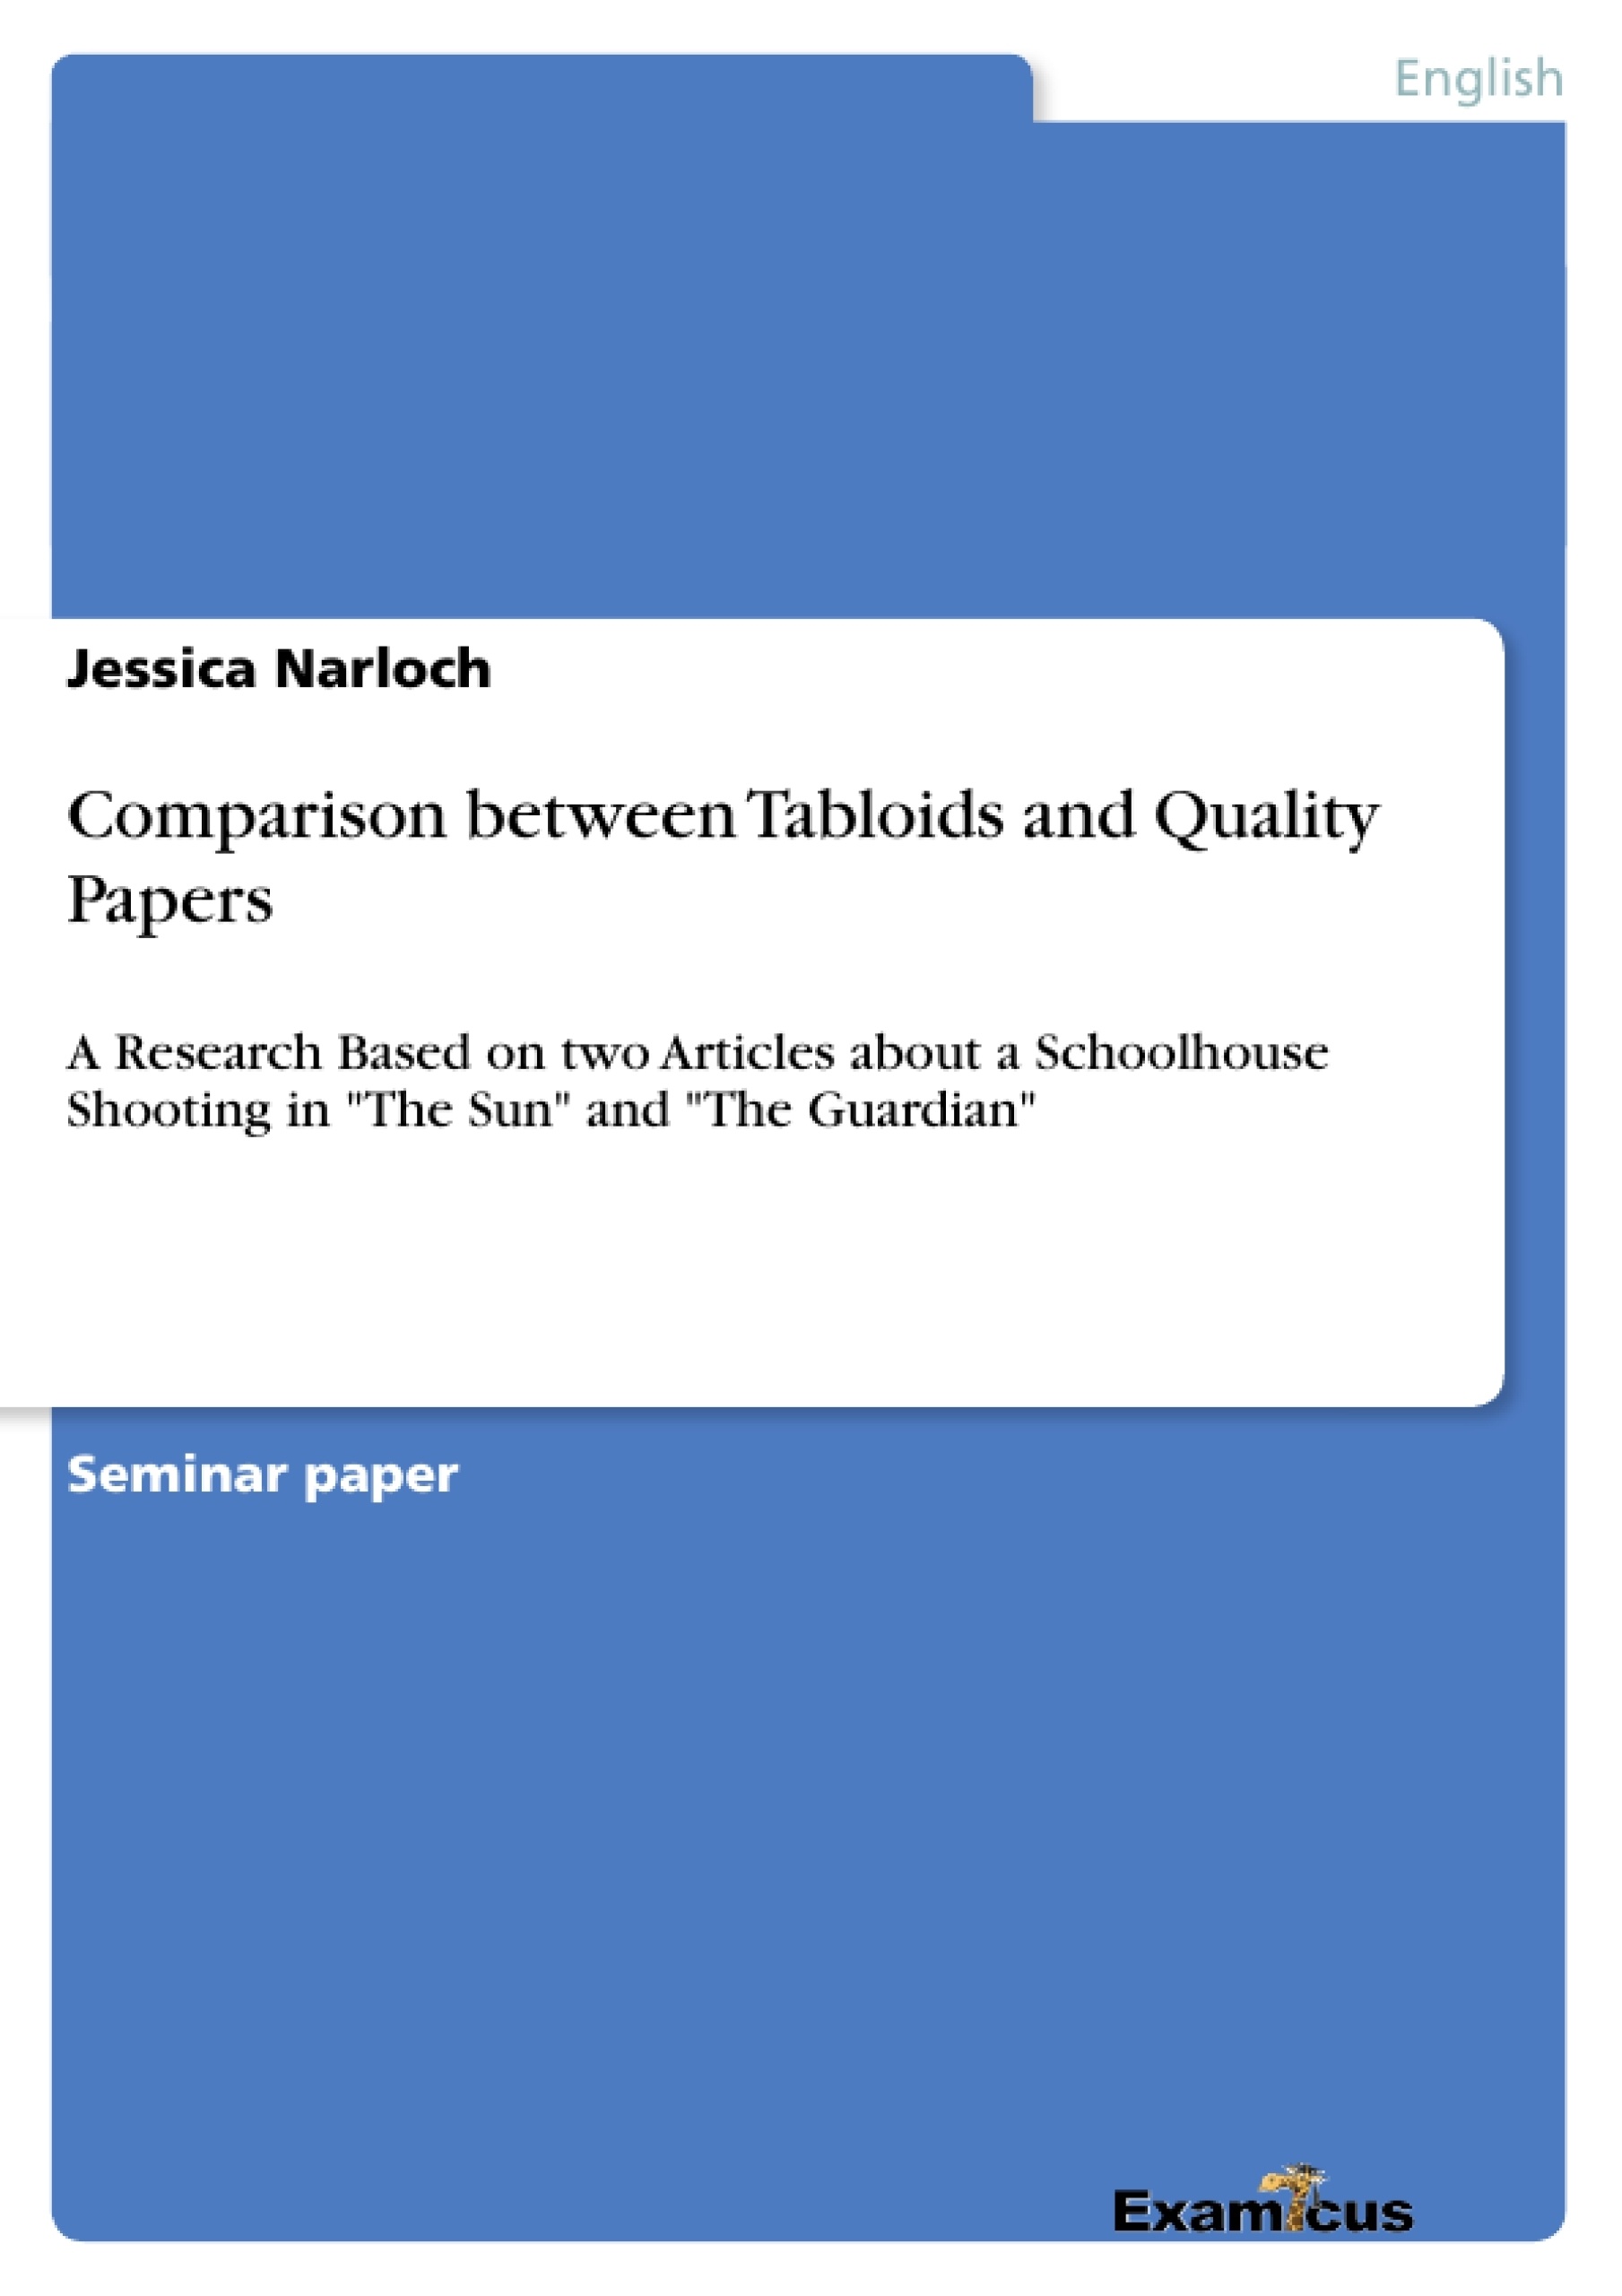 Title: Comparison between Tabloids and Quality Papers